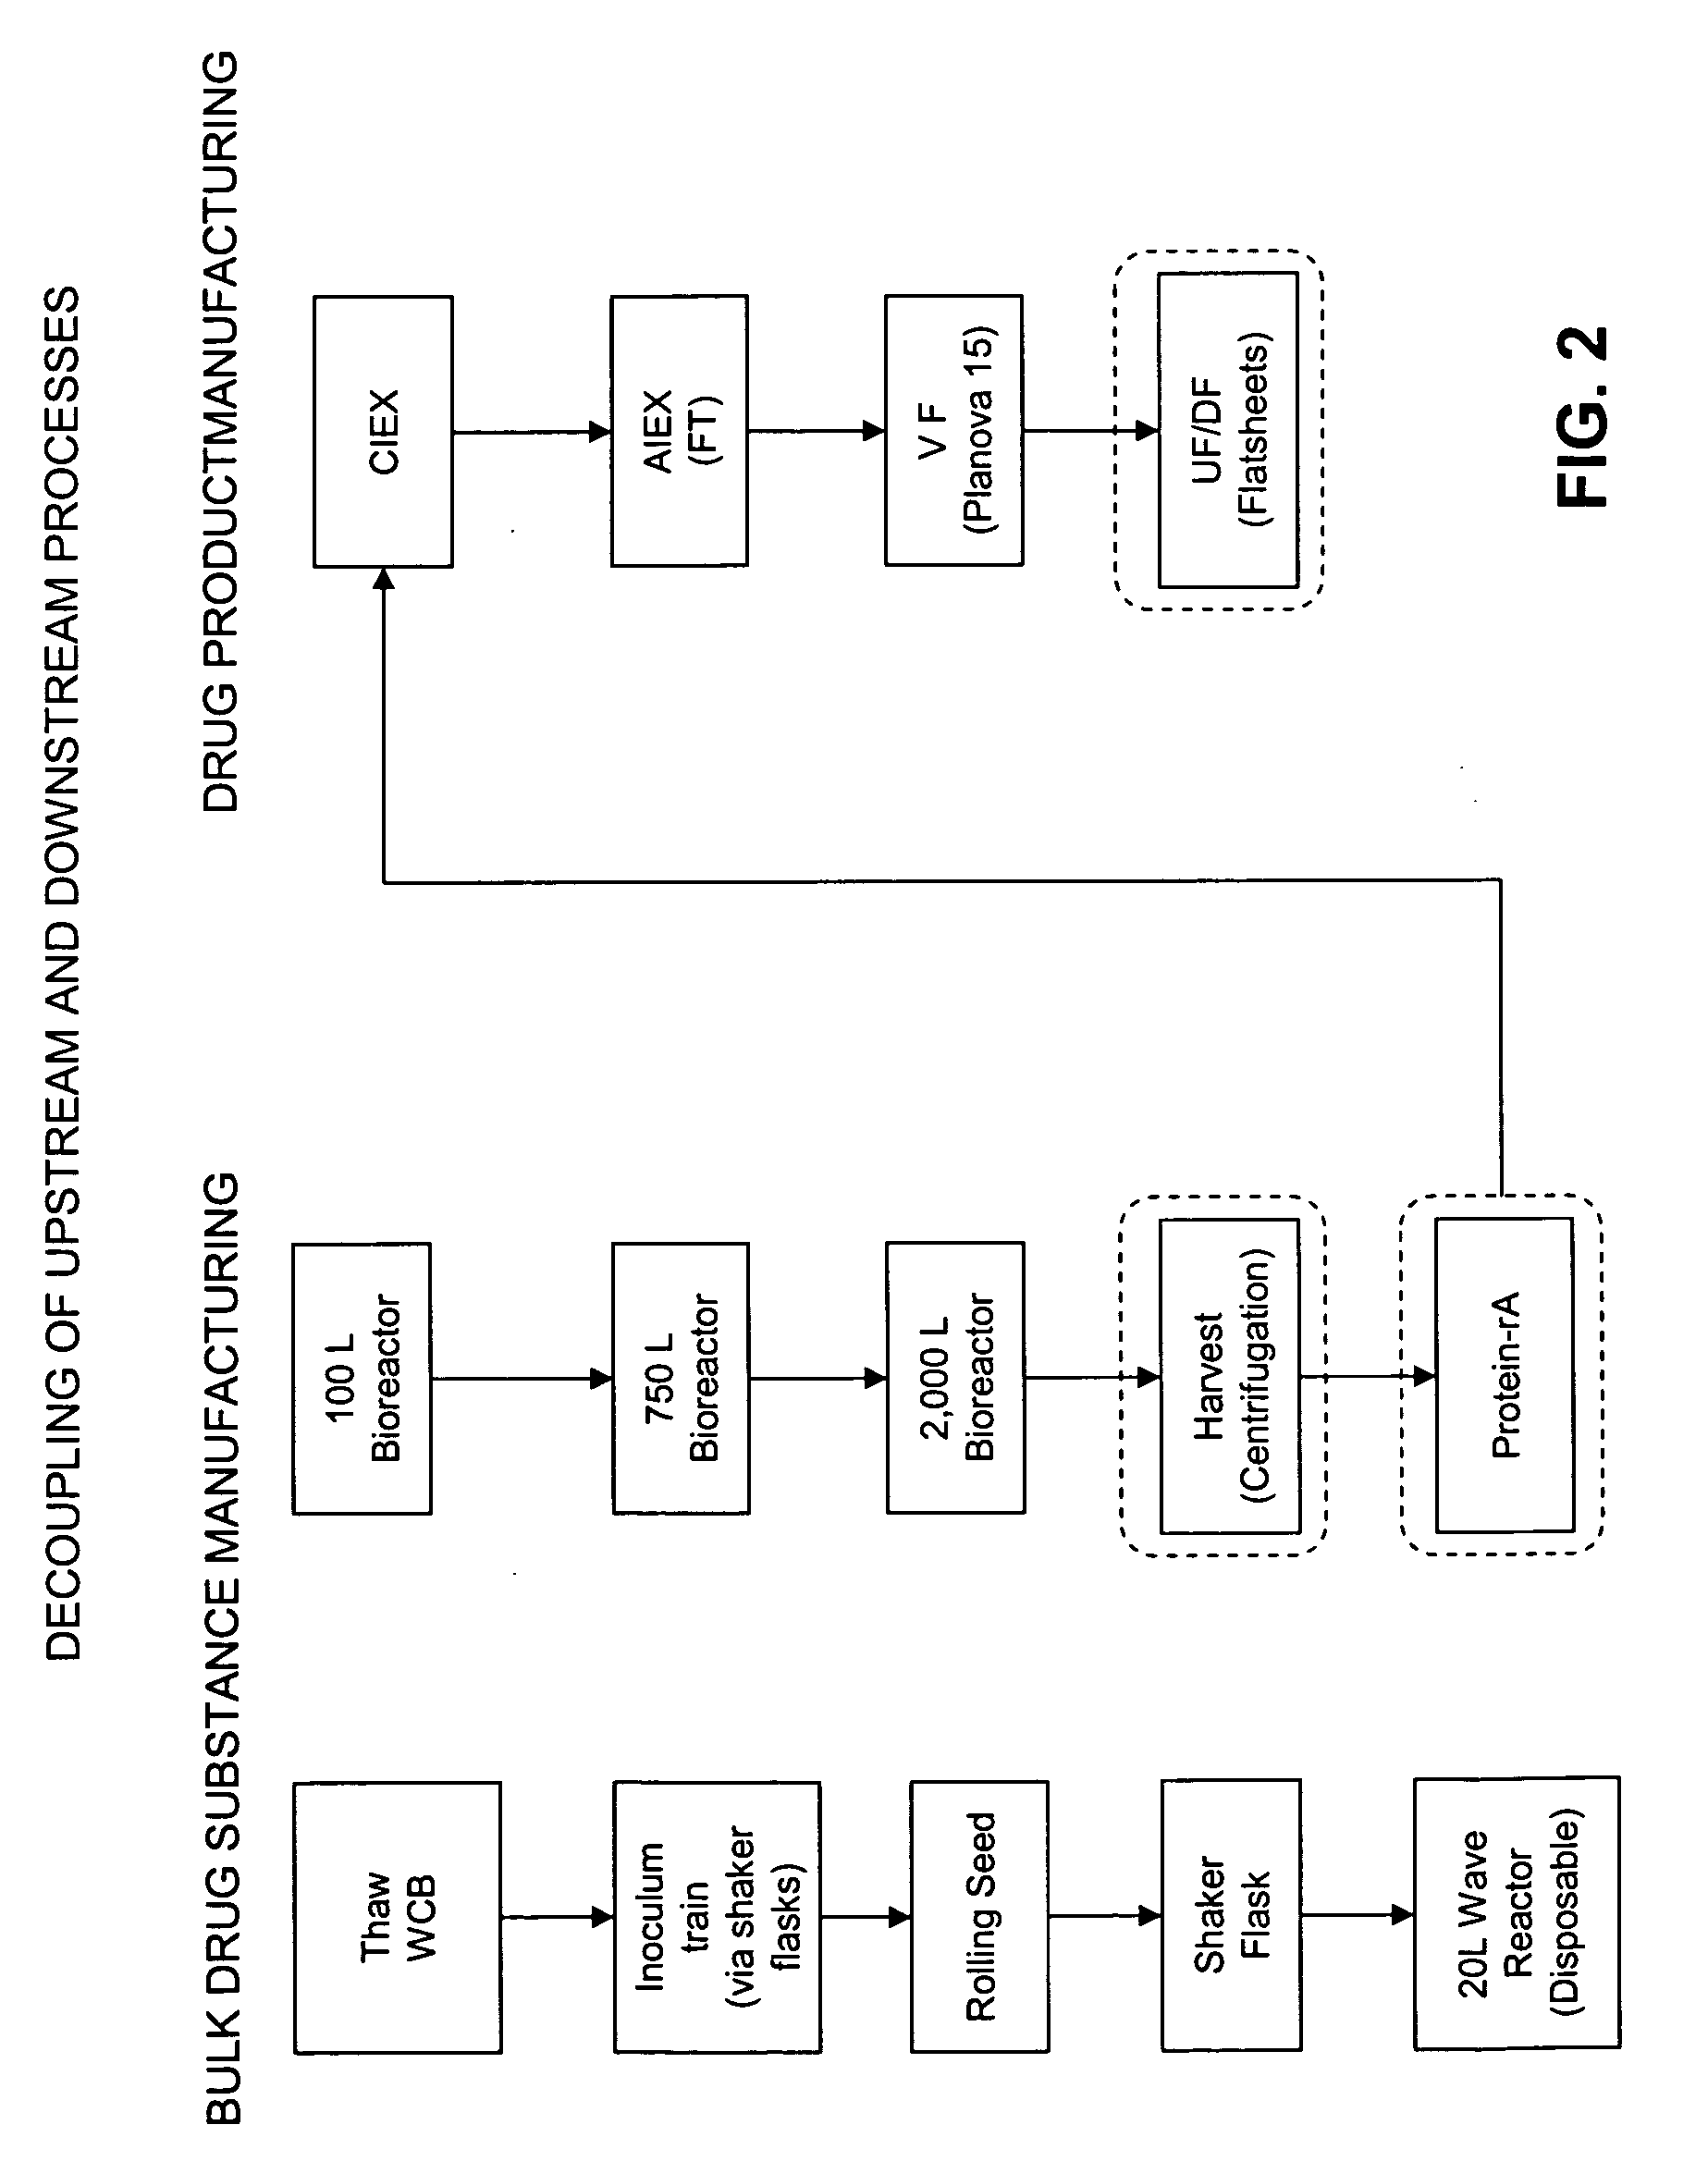 Methods of Manufacturing a Biologic Using a Stable Storage Intermediate